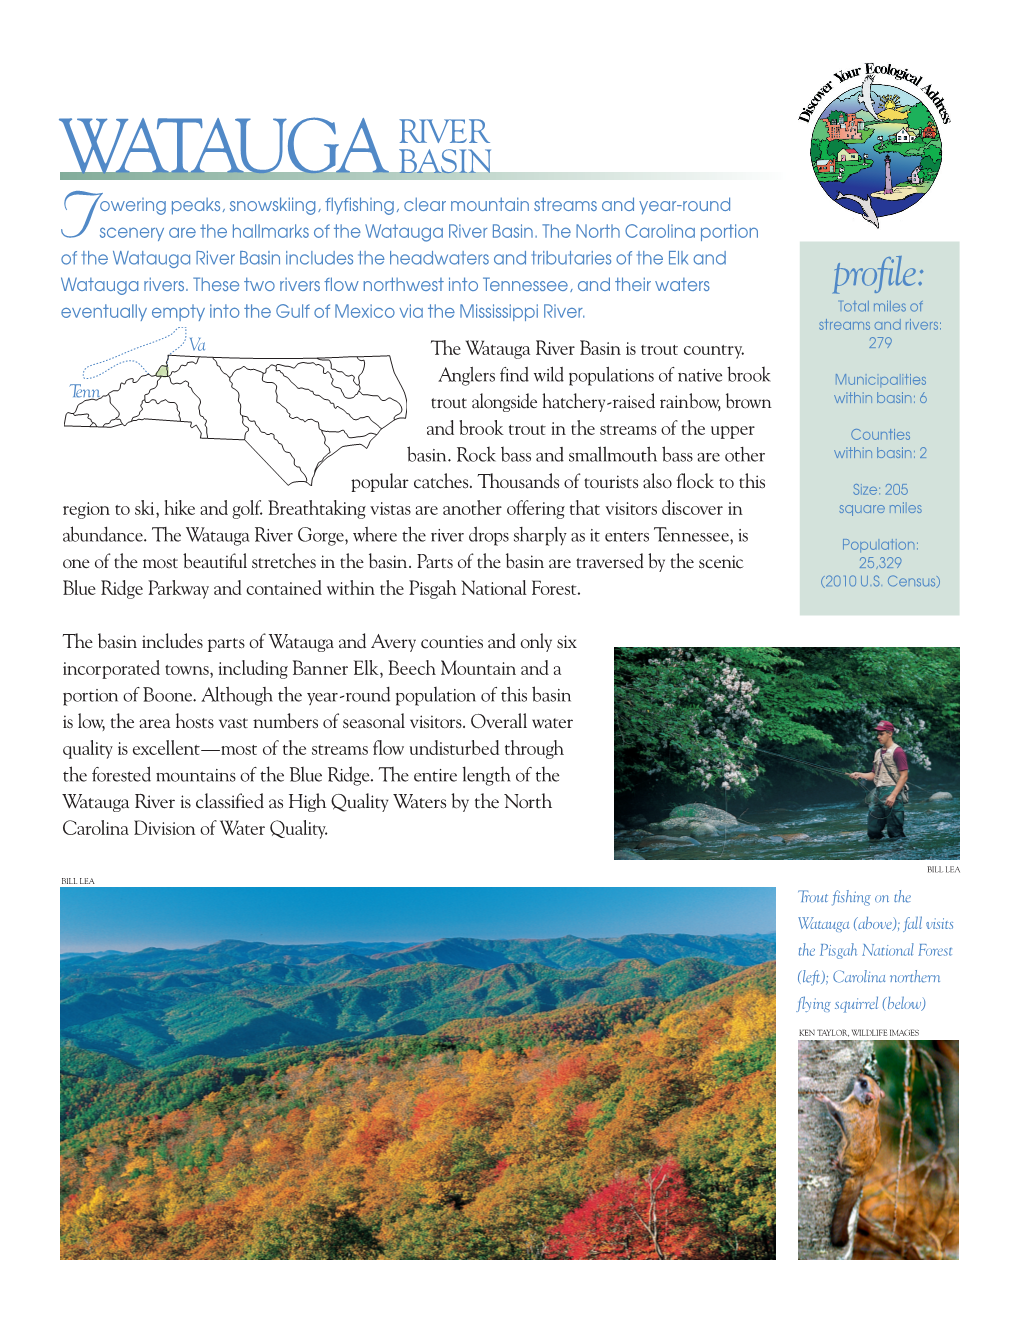 WATAUGA BASIN Owering Peaks, Snowskiing, Flyfishing, Clear Mountain Streams and Year-Round T Scenery Are the Hallmarks of the Watauga River Basin